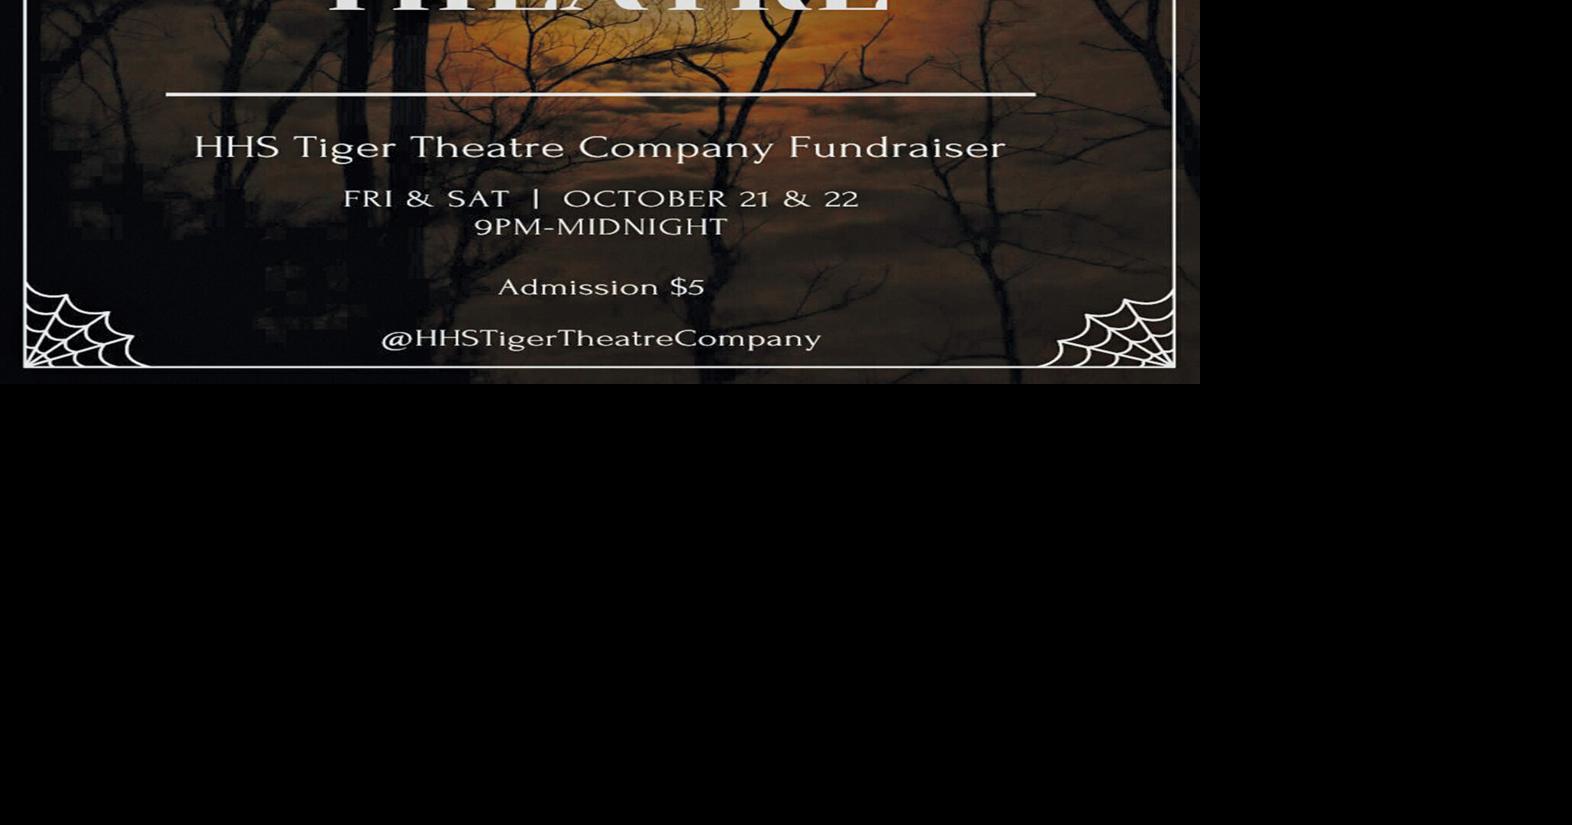 HHS Theatre Company to host 6th Annual Haunted Theatre | Entertainment